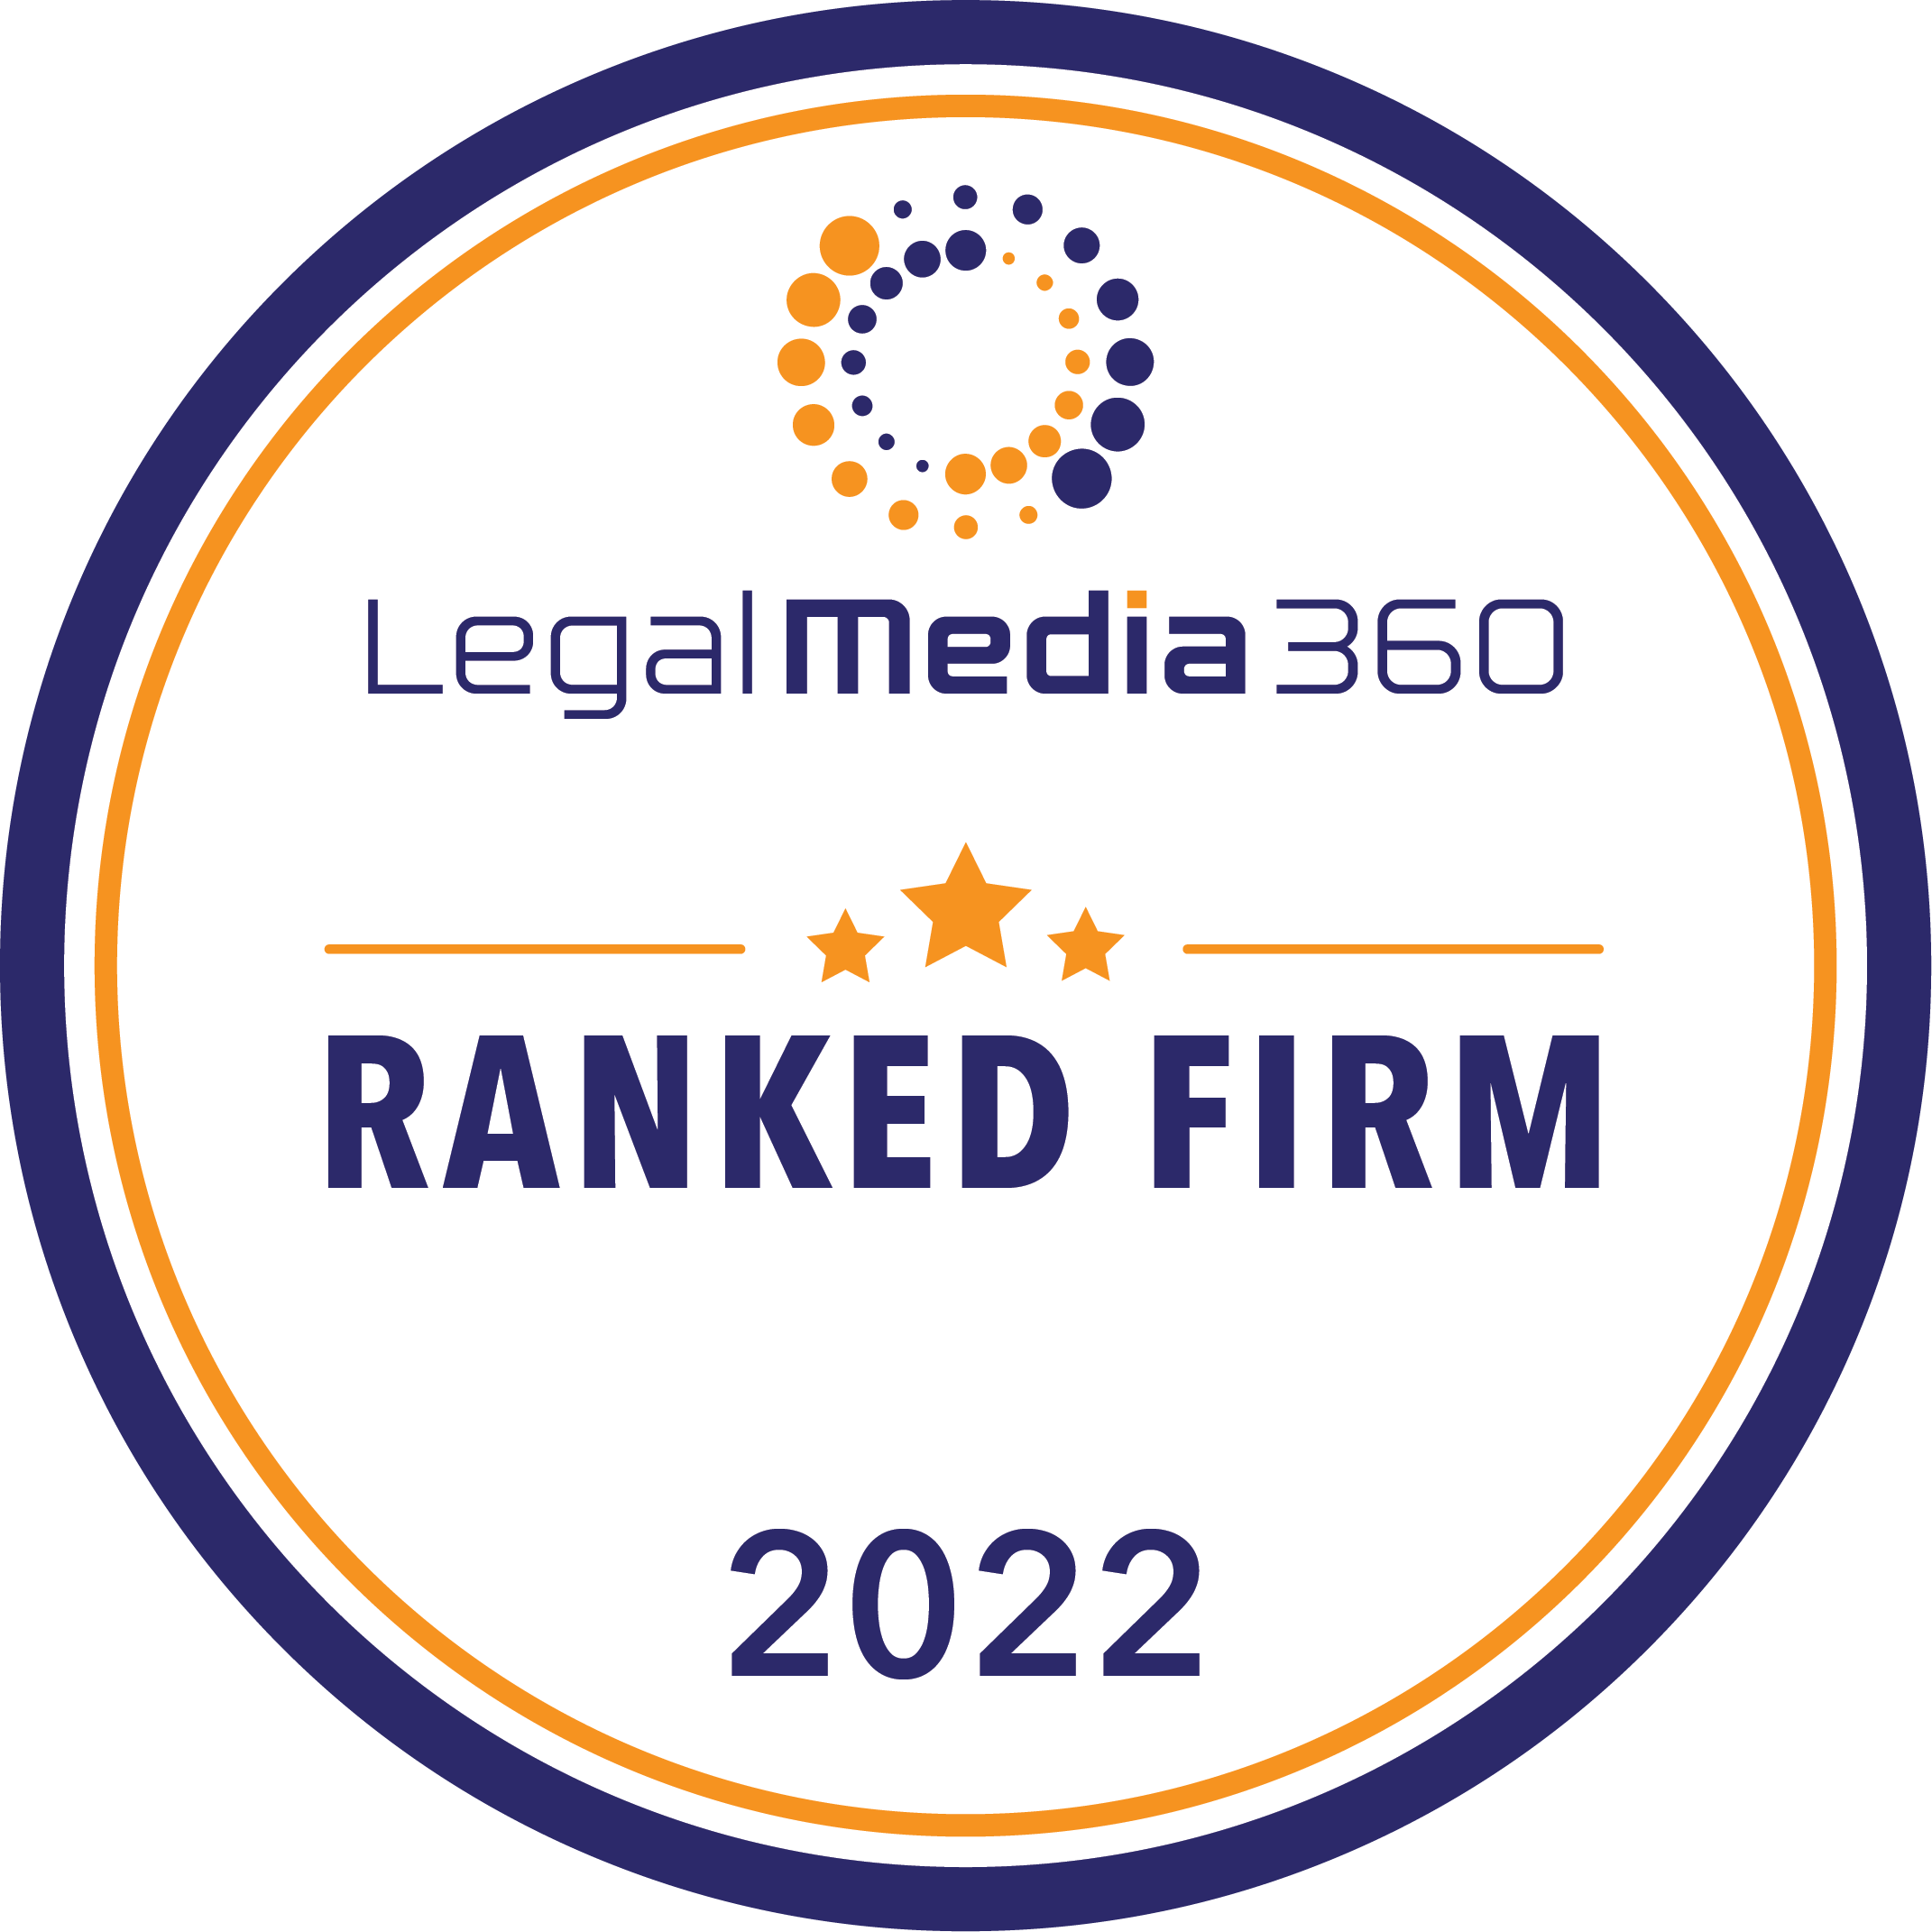 Ranked as a Hong Kong Domestic: Specialist by Legal Media 360 in Equity Capital Markets, Debt Capital Markets, Corporate and M&A, Restructuring and insolvency, 2022 edition